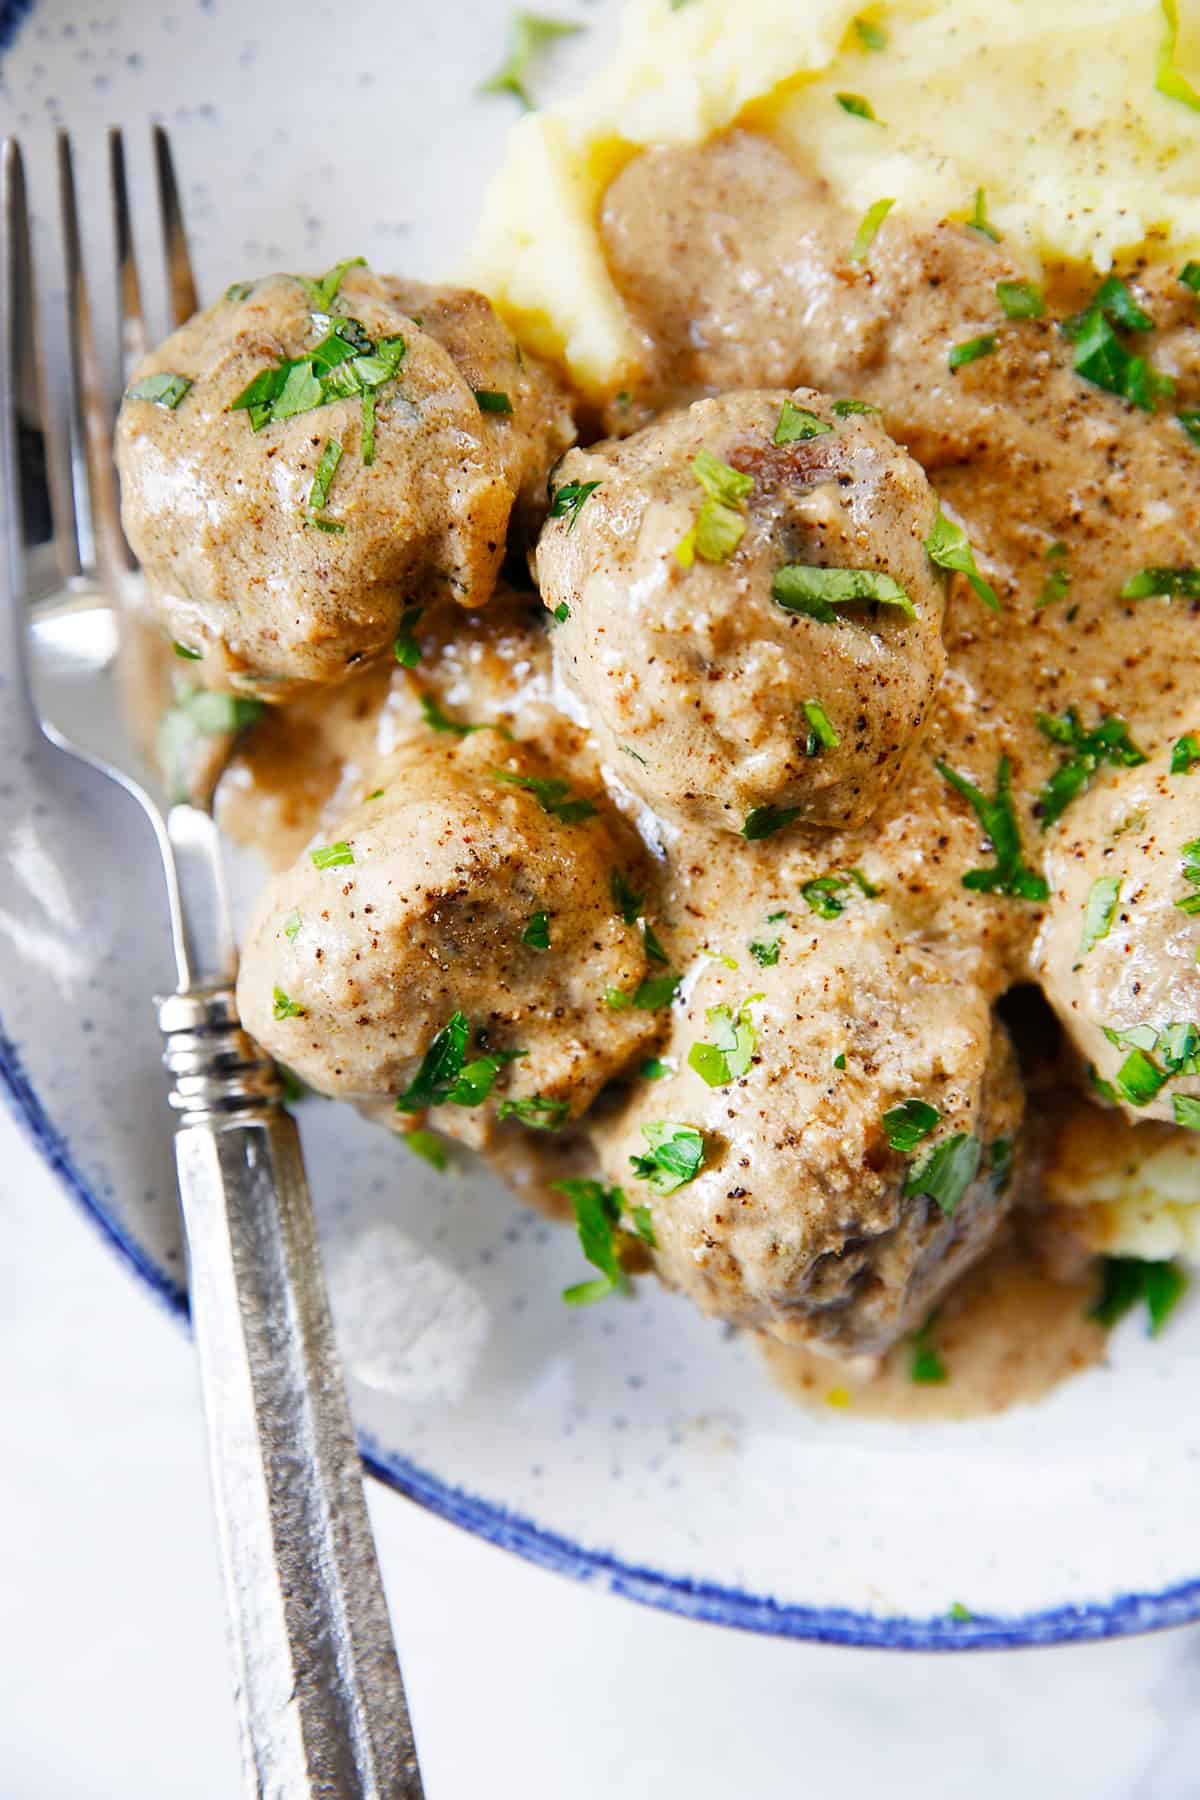 Gluten free Swedish Meatballs smothered in gravy on a plate.